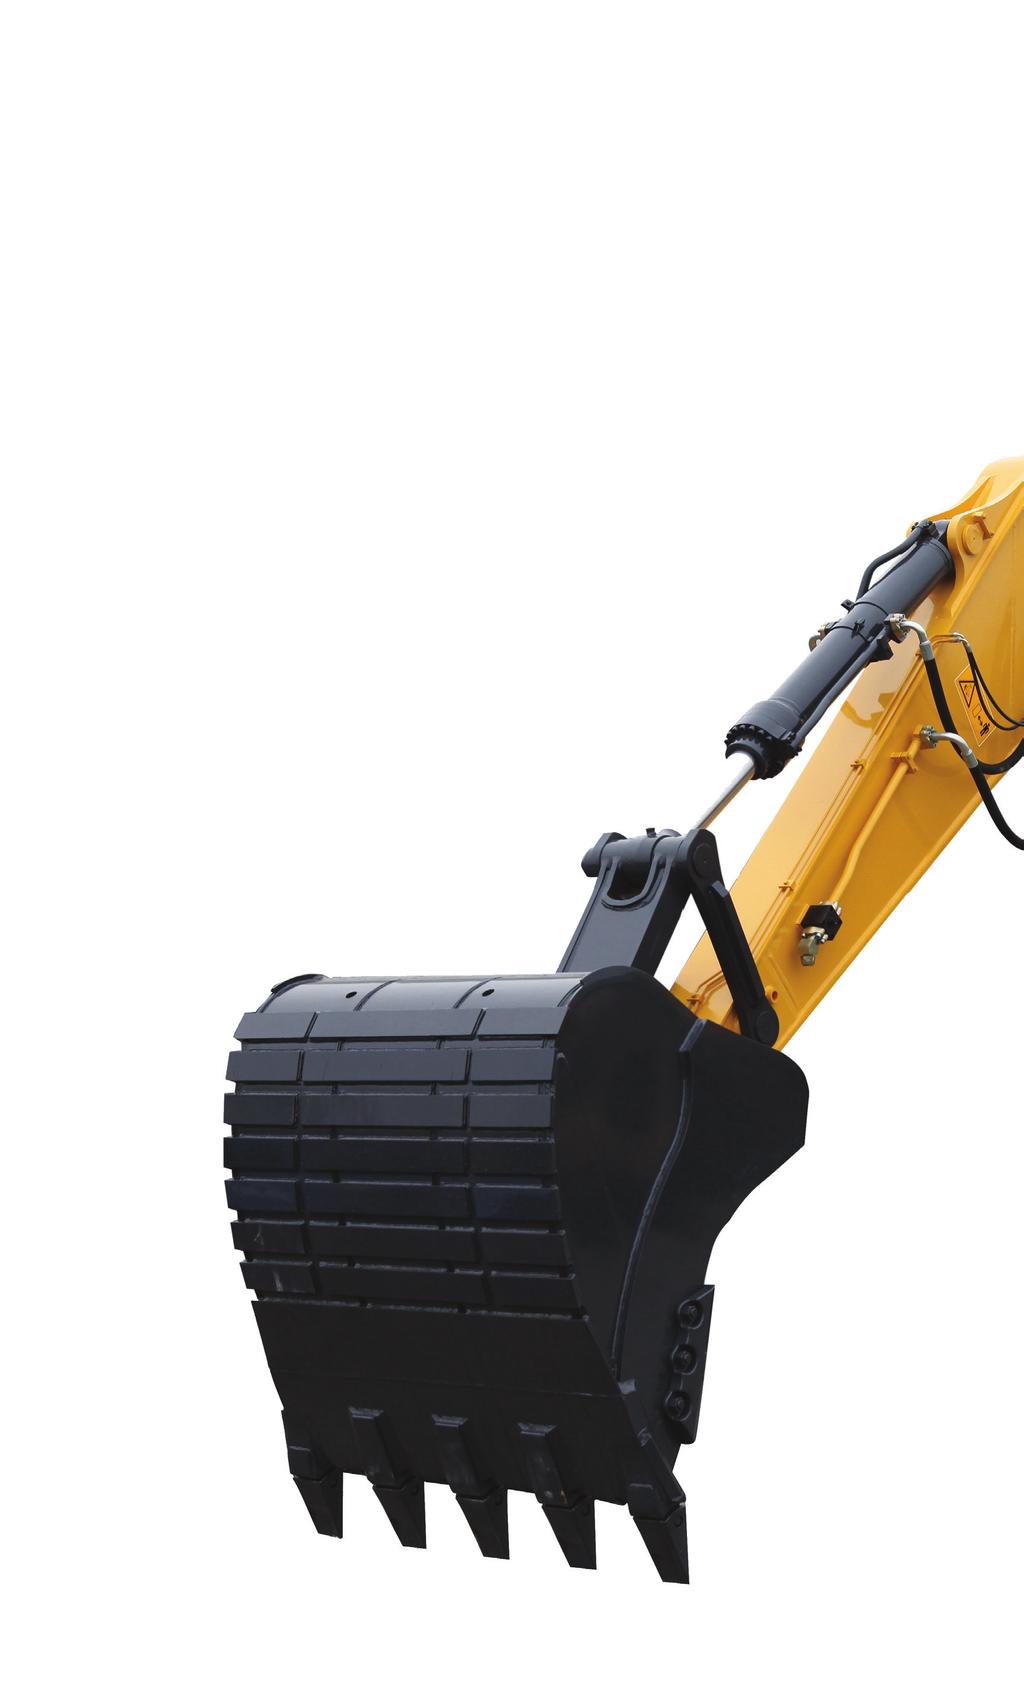 950E EXCAVATOR UNBEATABLE RETURN ON YOUR INVESTMENT LiuGong s customer-driven design and quality-focused engineering creates lasting value that will deliver to your bottom line.